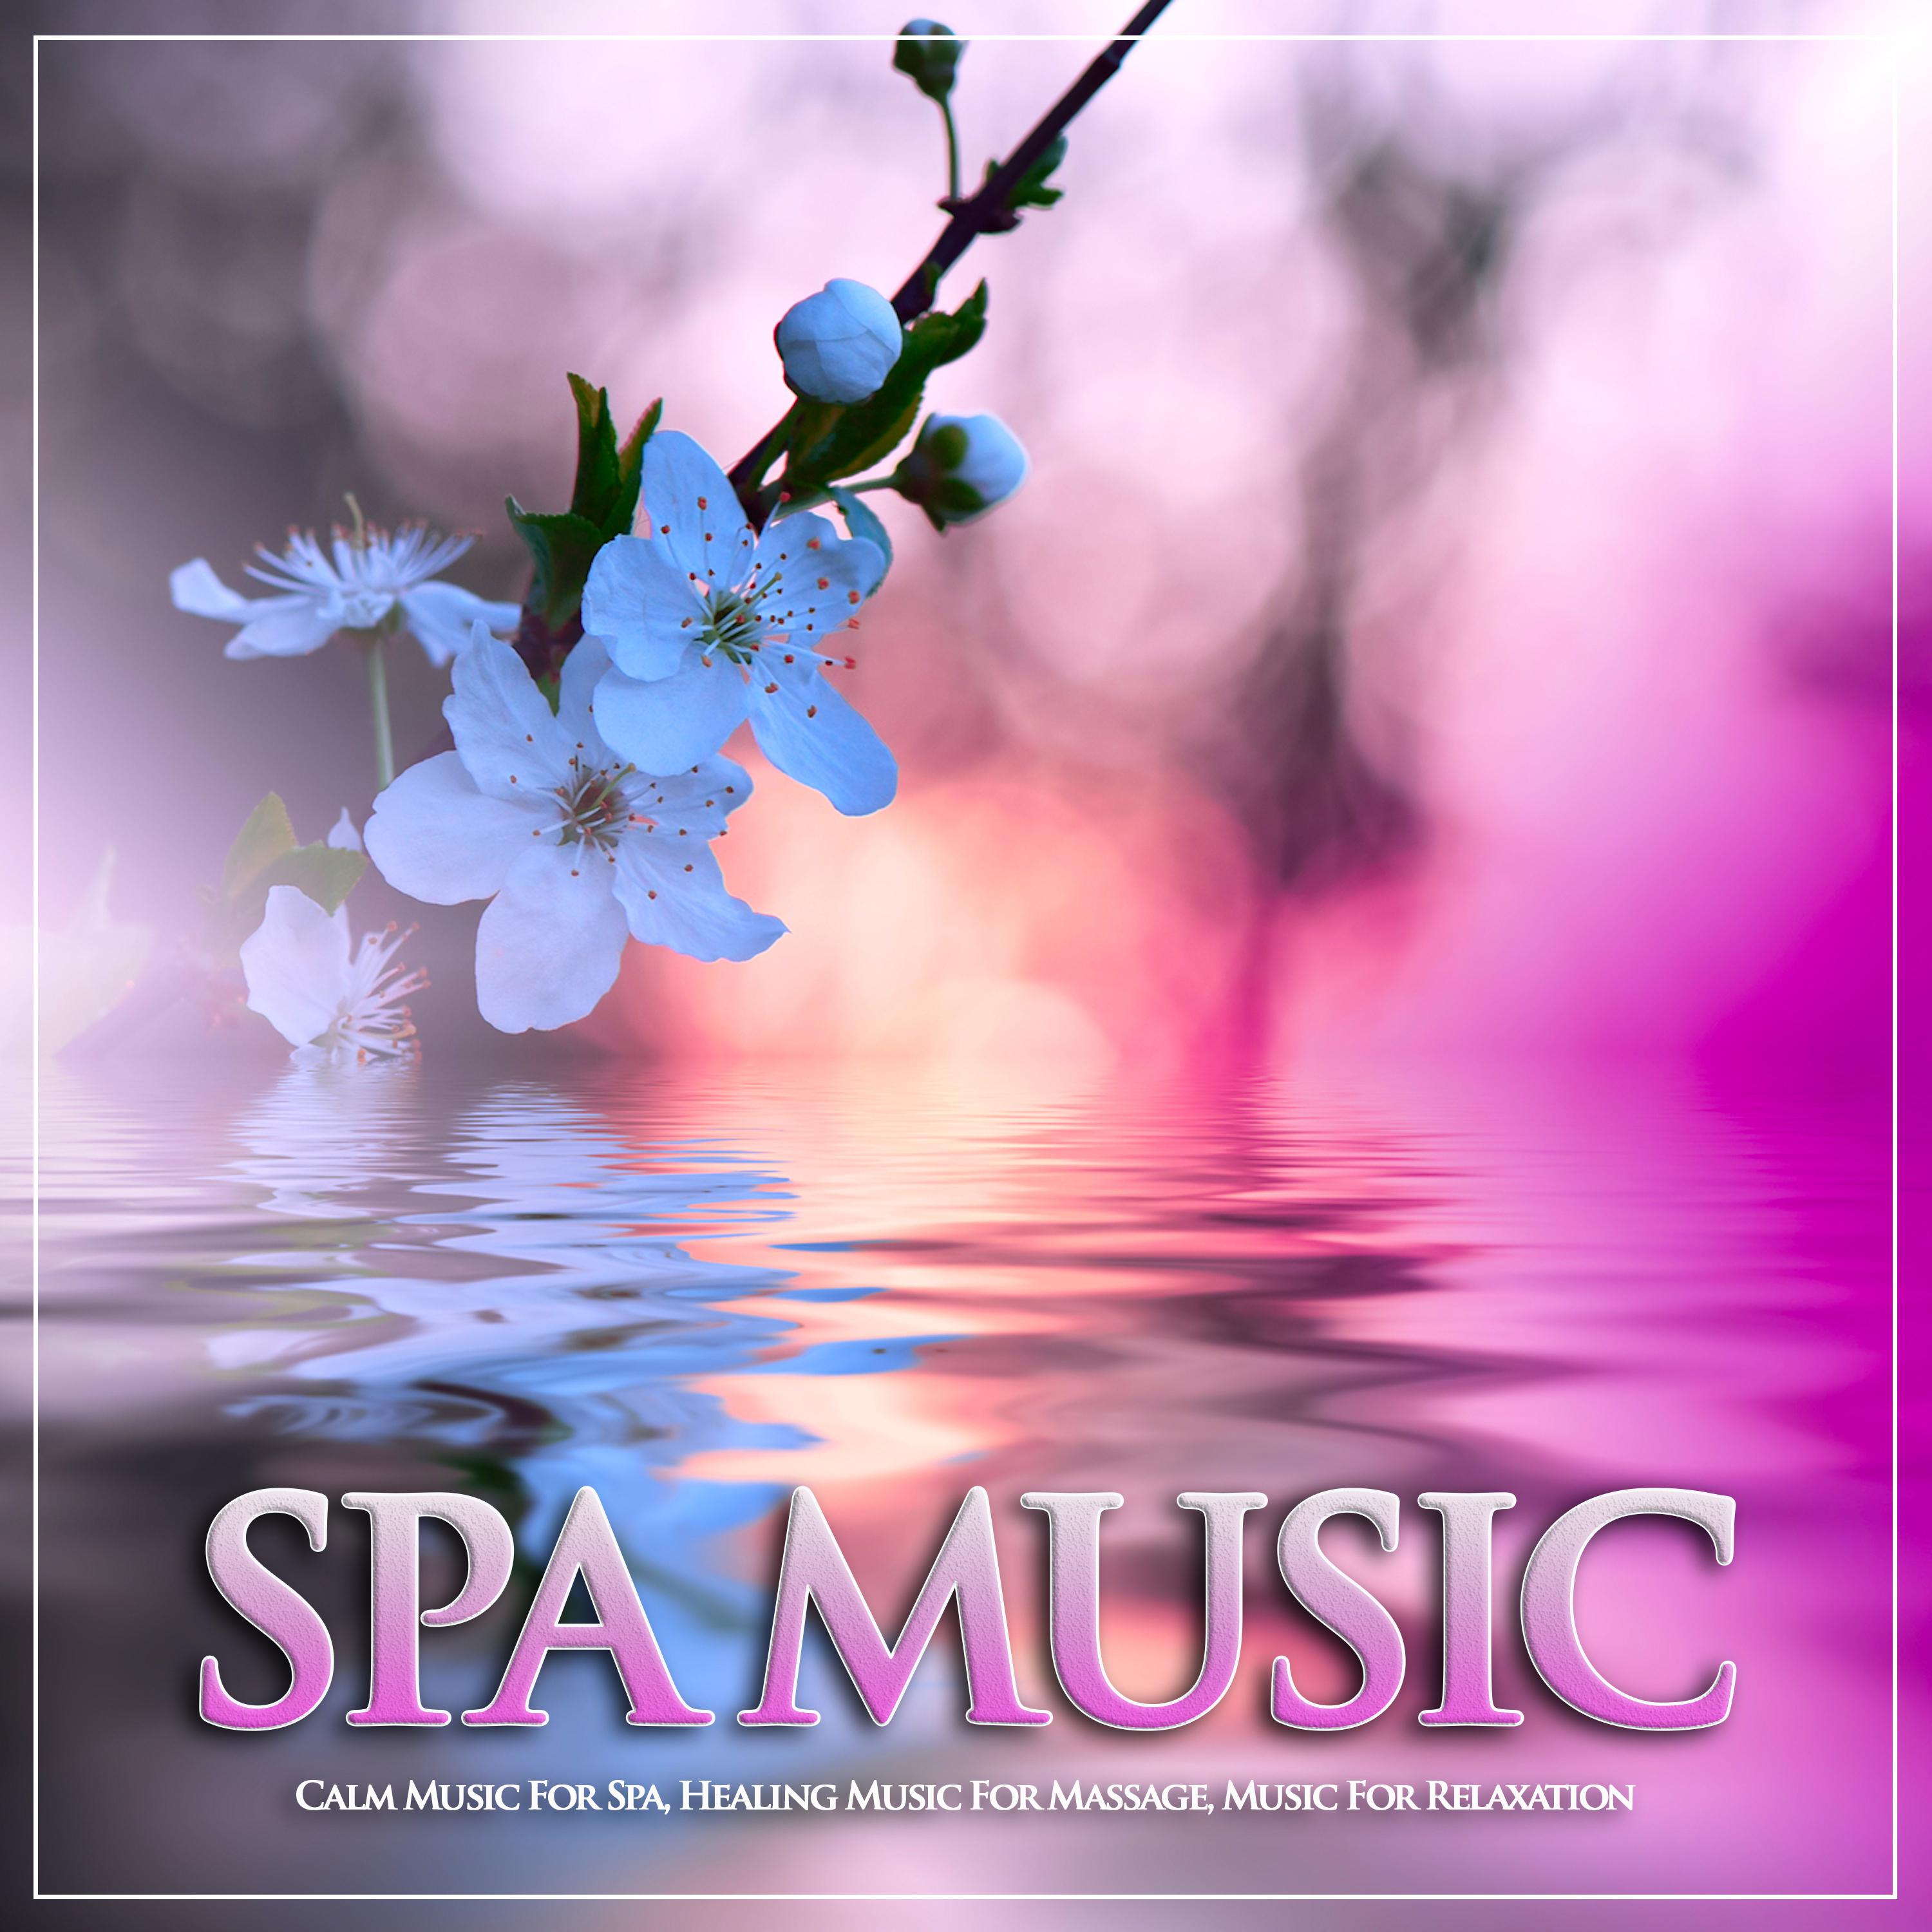 Spa Music: Calm Music For Spa, Healing Music For Massage, Music For Relaxation